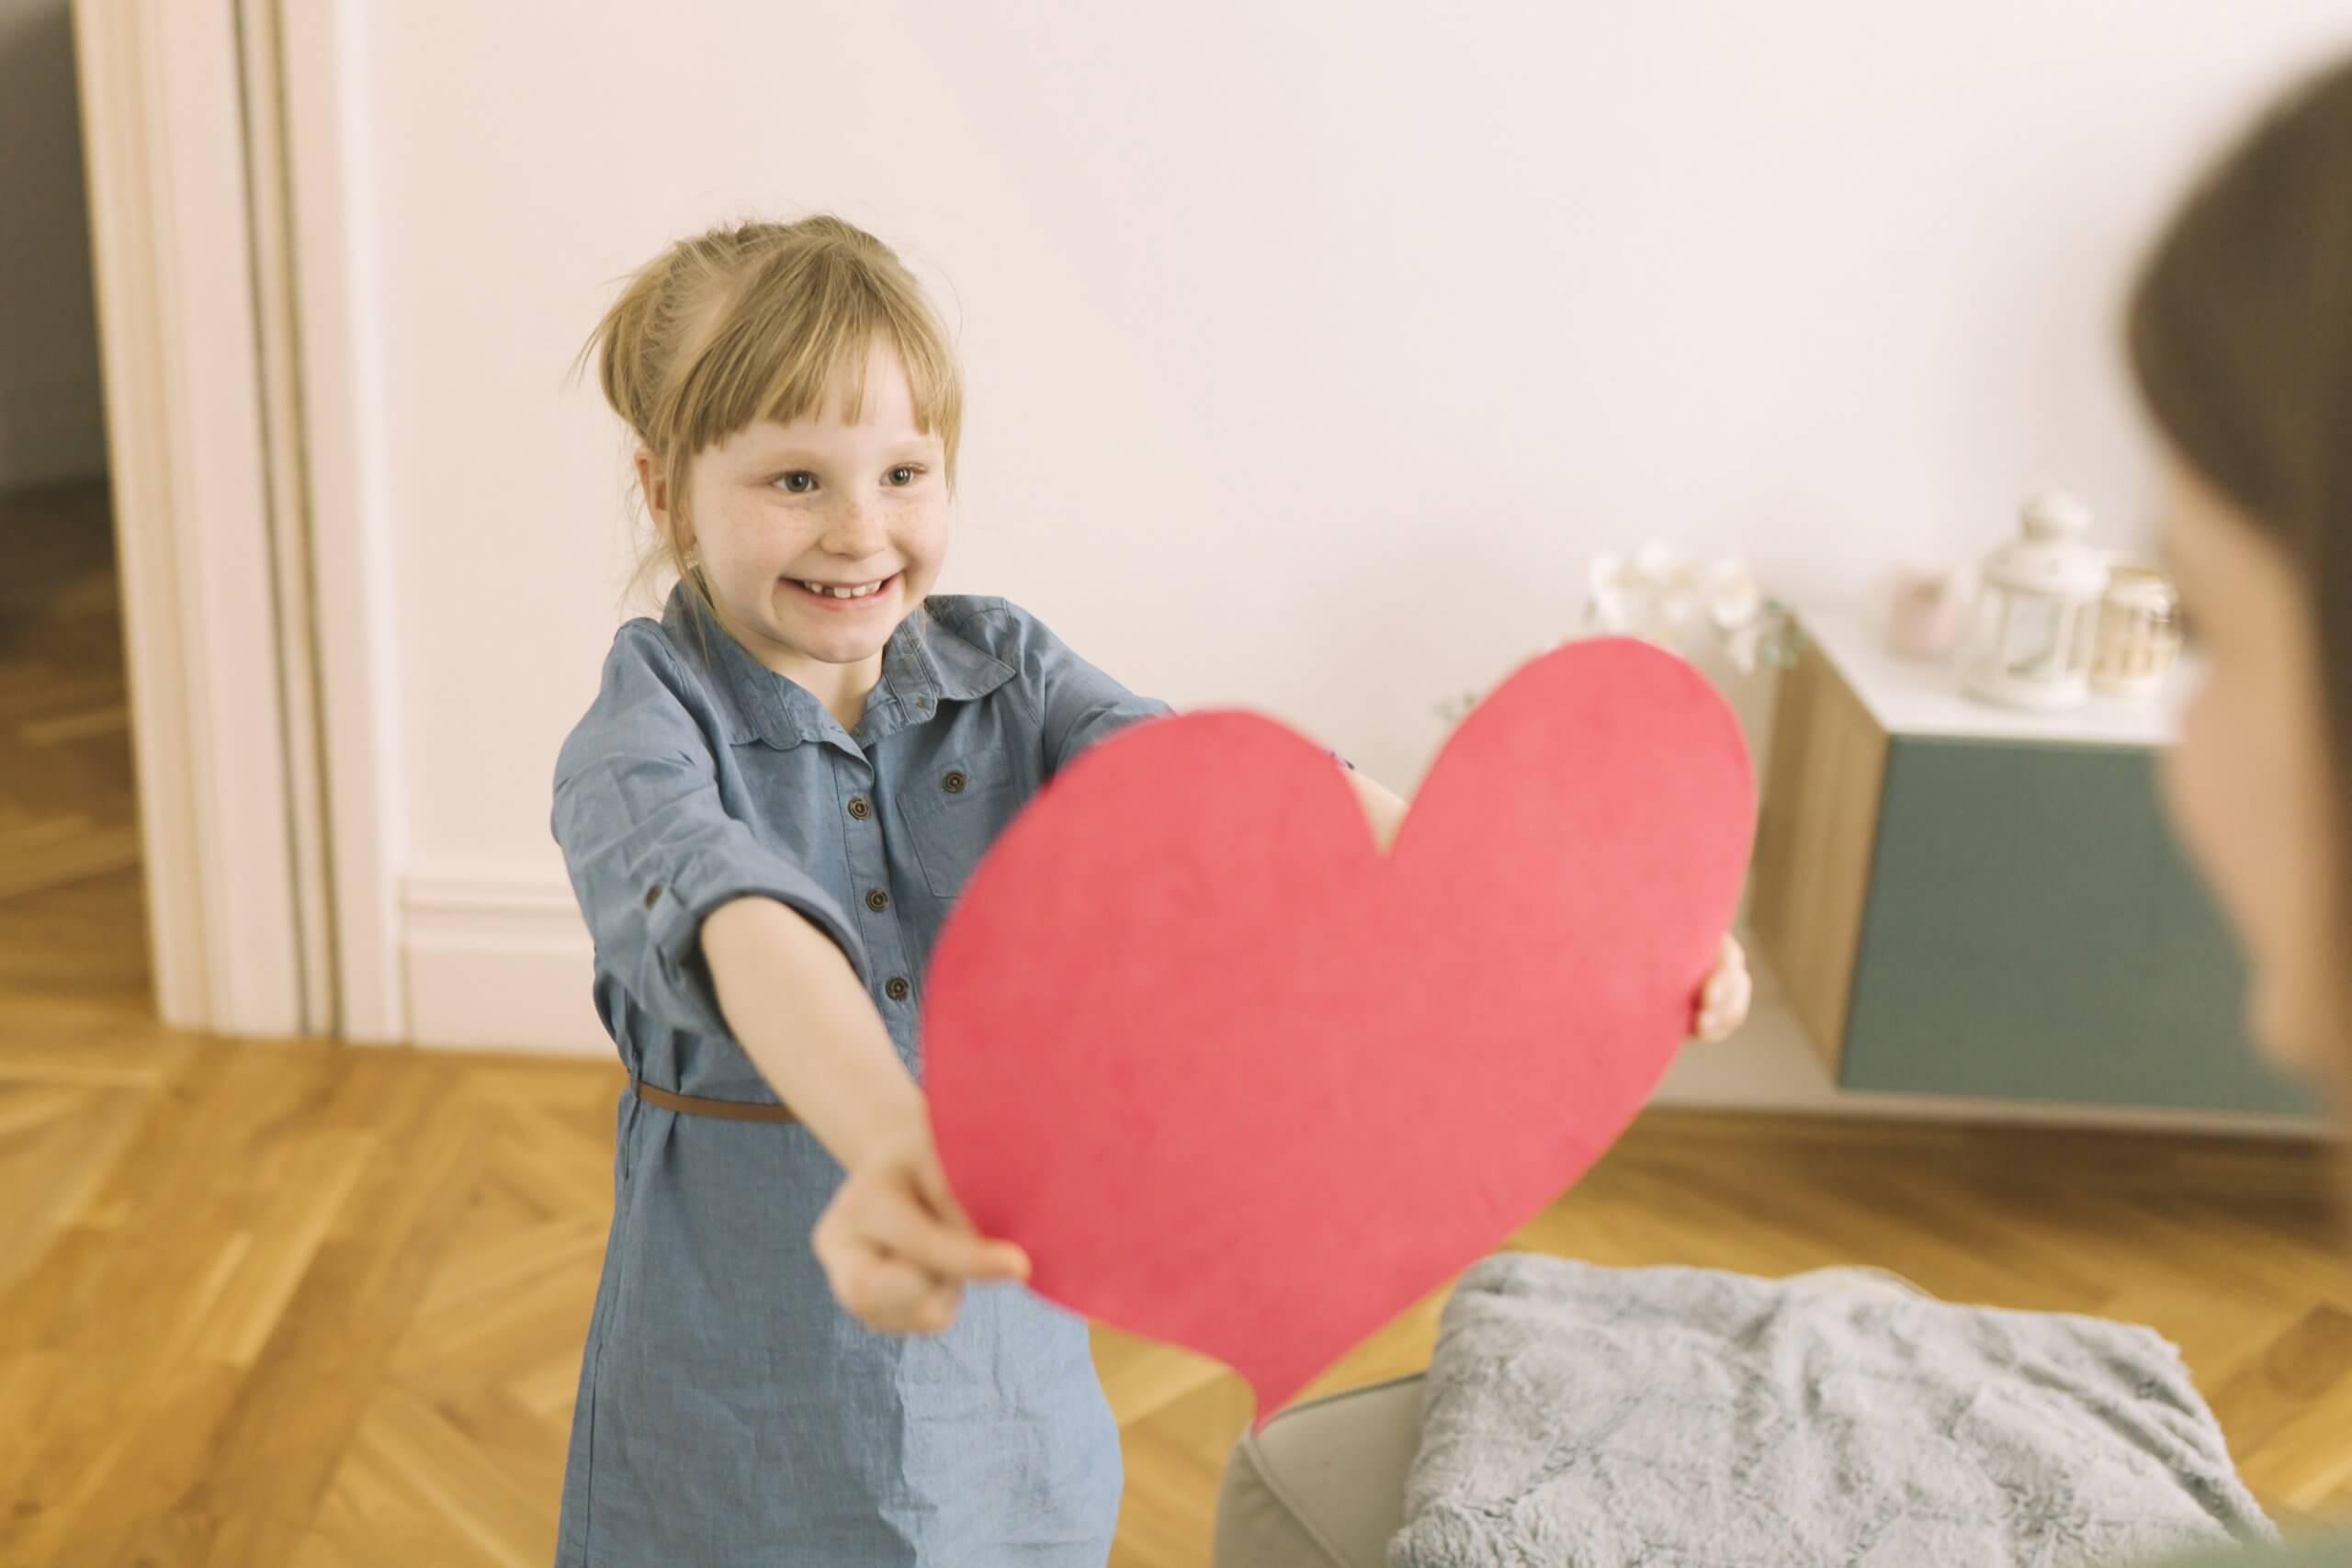 Is Valentine’s Day Overrated? How to Spend Valentine’s Day with Your Family